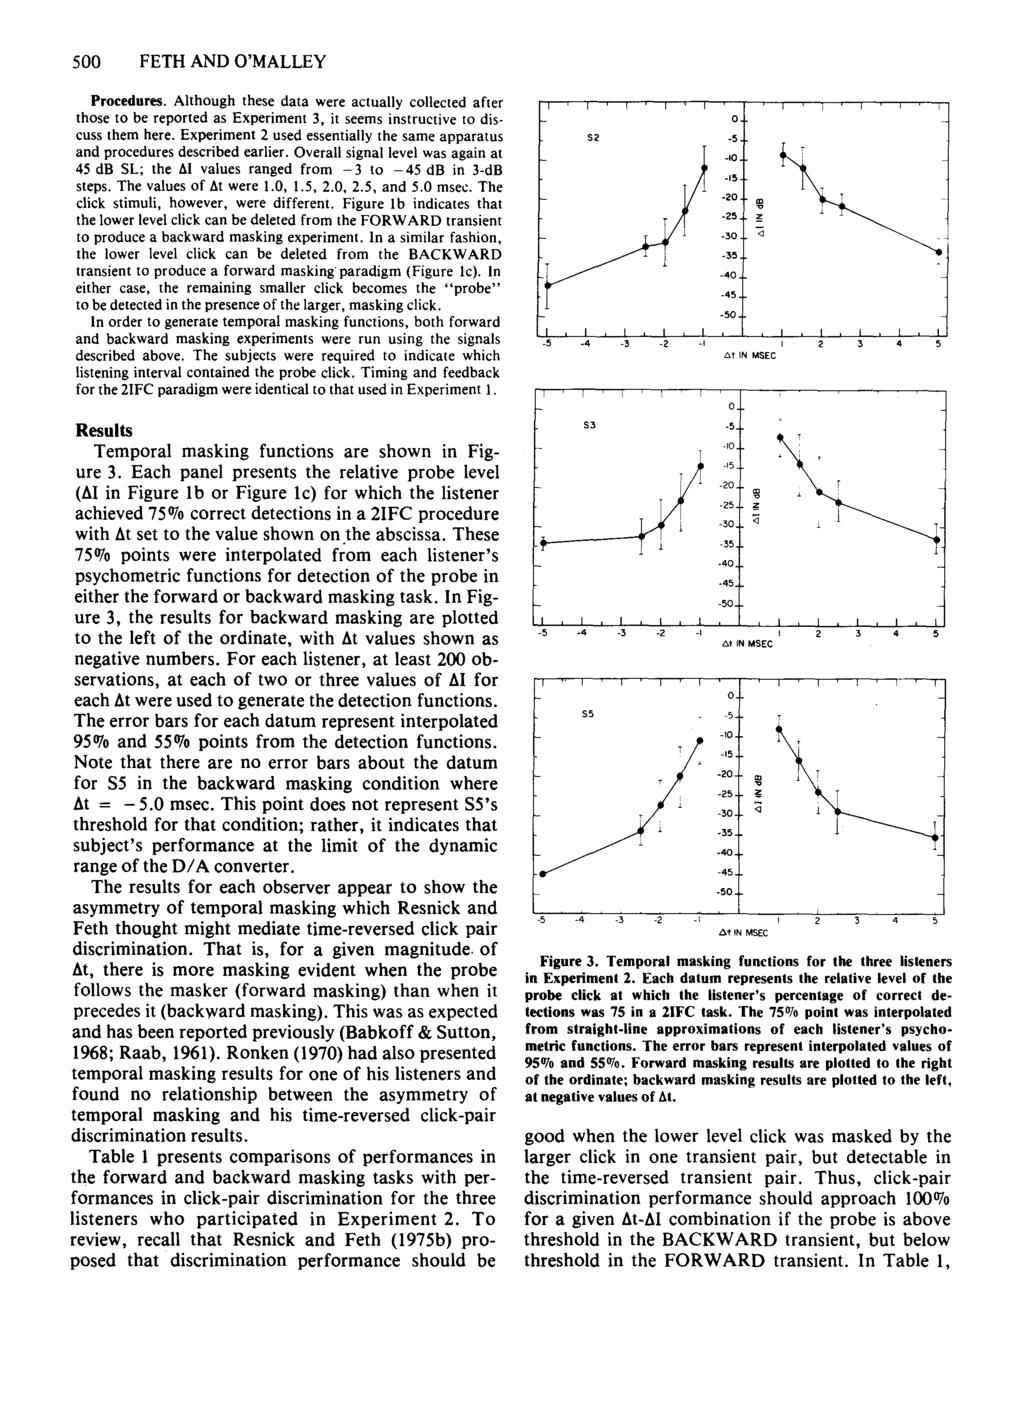 00 FETH AND O'MALLEY Procedures. Although these data were actually collected after those to be reported as Experiment 3, it seems instructive to discuss them here.